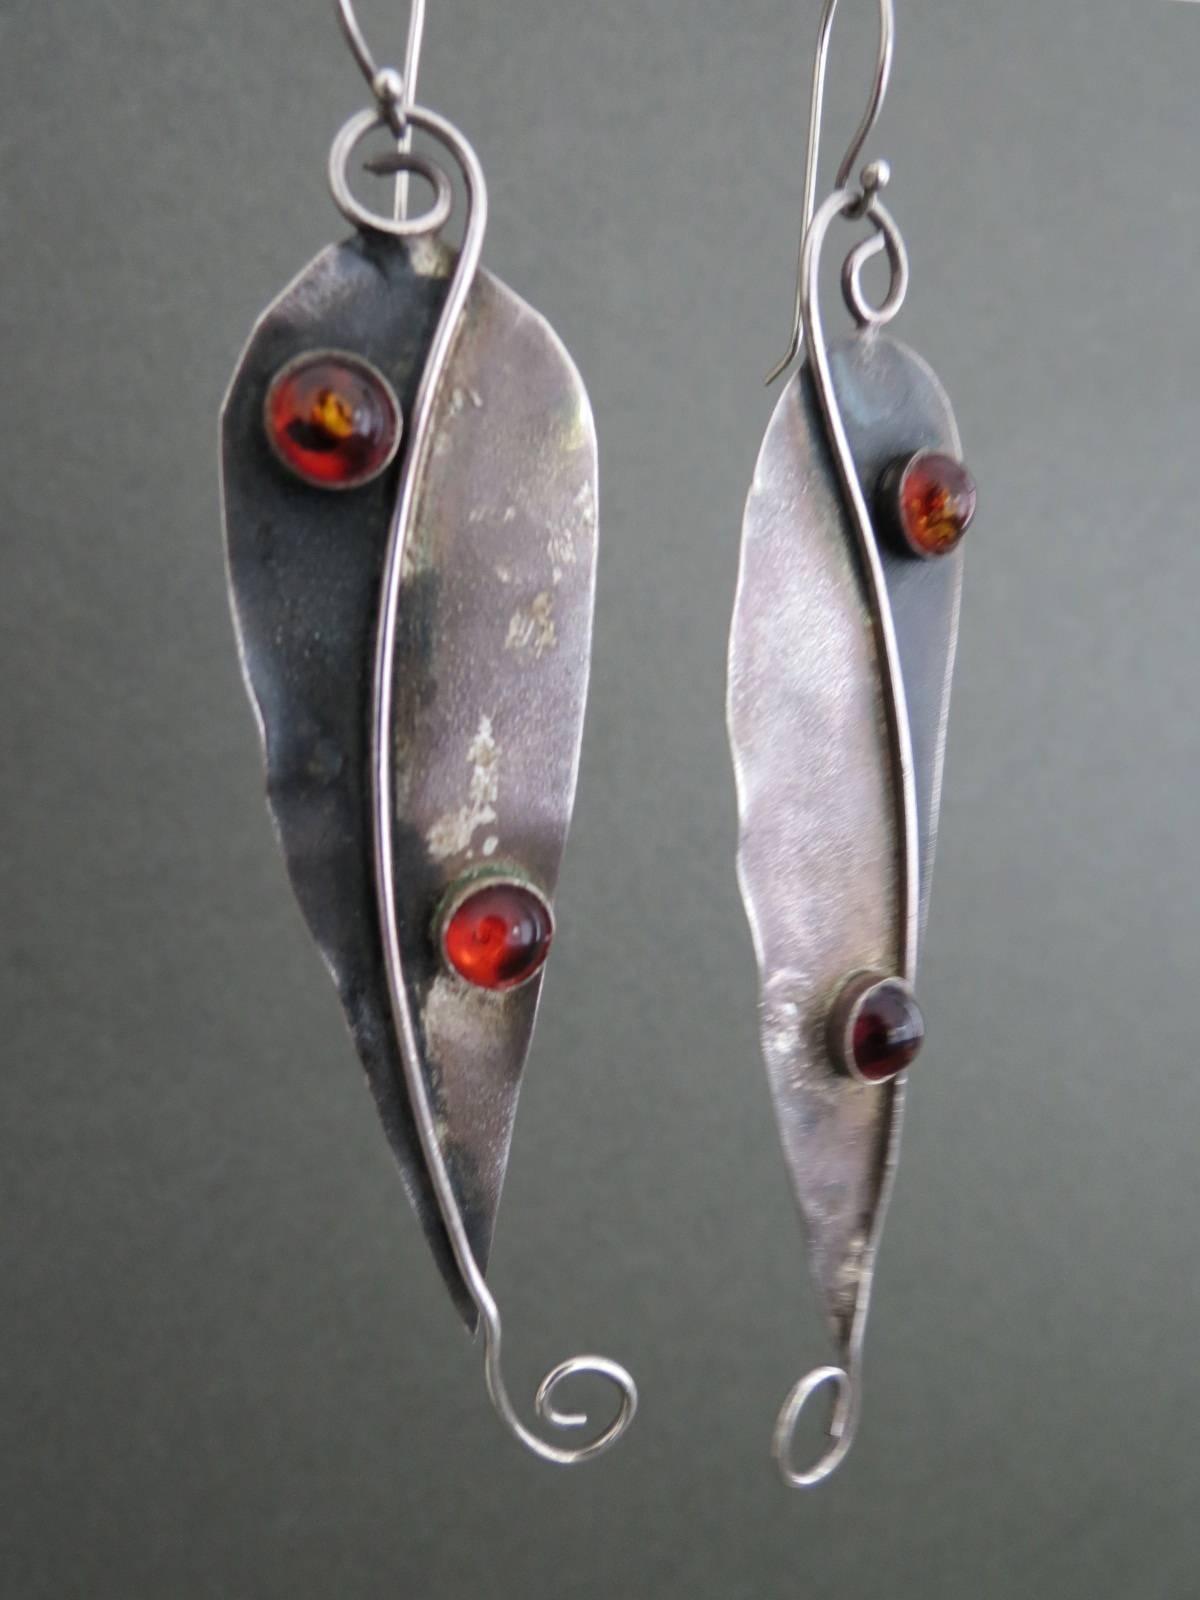 This vintage set of Danish silver earrings would be lovely addition to your collection.
Item Specifics
Height: 9cm (approx 3.50